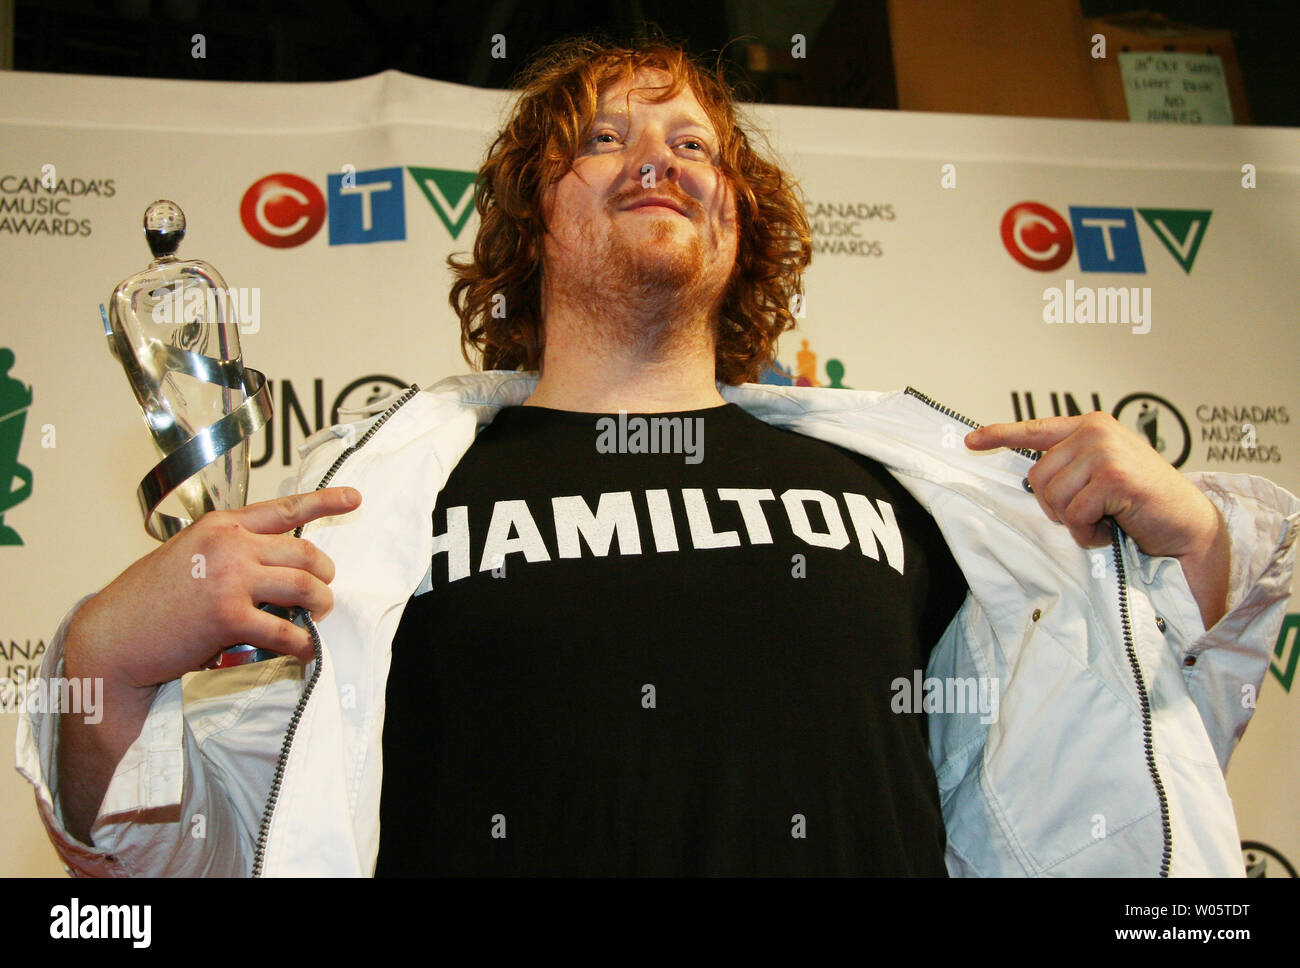 Best New Artist of the Year winner Tomi Swick poses for a photo in the  Credit Union Center at Saskatoon, Saskatchewan during the 2007 JUNO Awards  and Broadcast on April 01, 2007. (